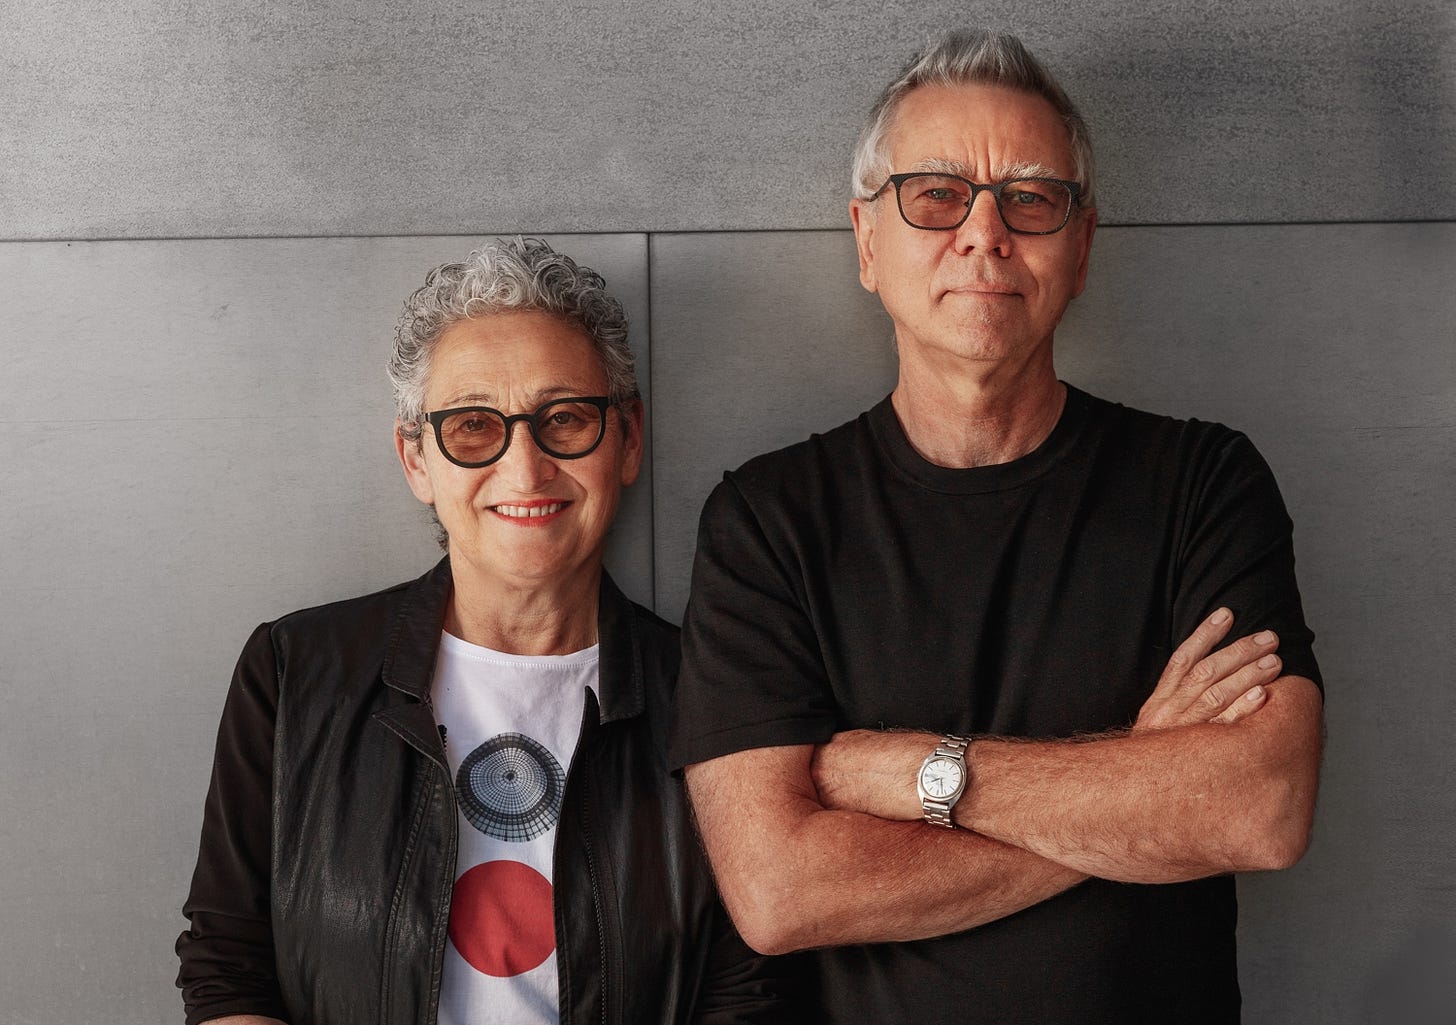 Pioneering duo design for inclusiveness to impact public good | UNSW  Newsroom